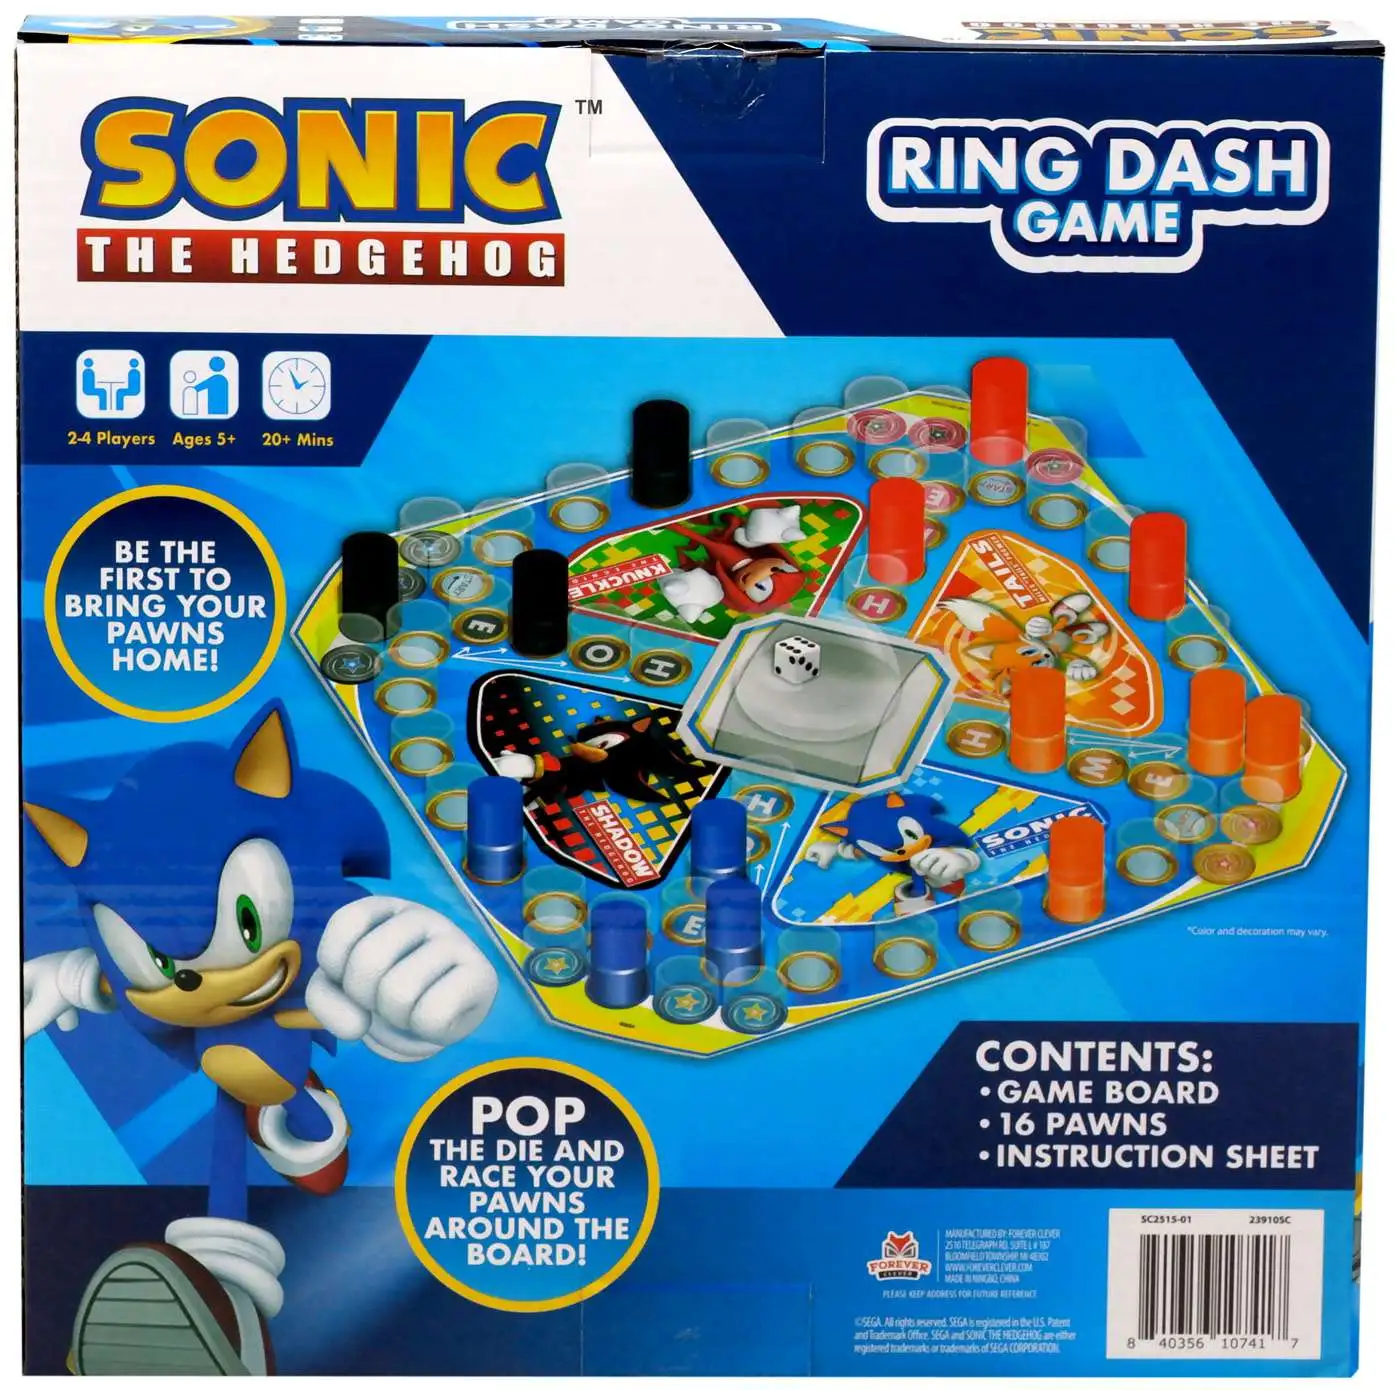 Sonic The Hedgehog 100 Games Collection (2022, Forever Clever) #SC2241-01